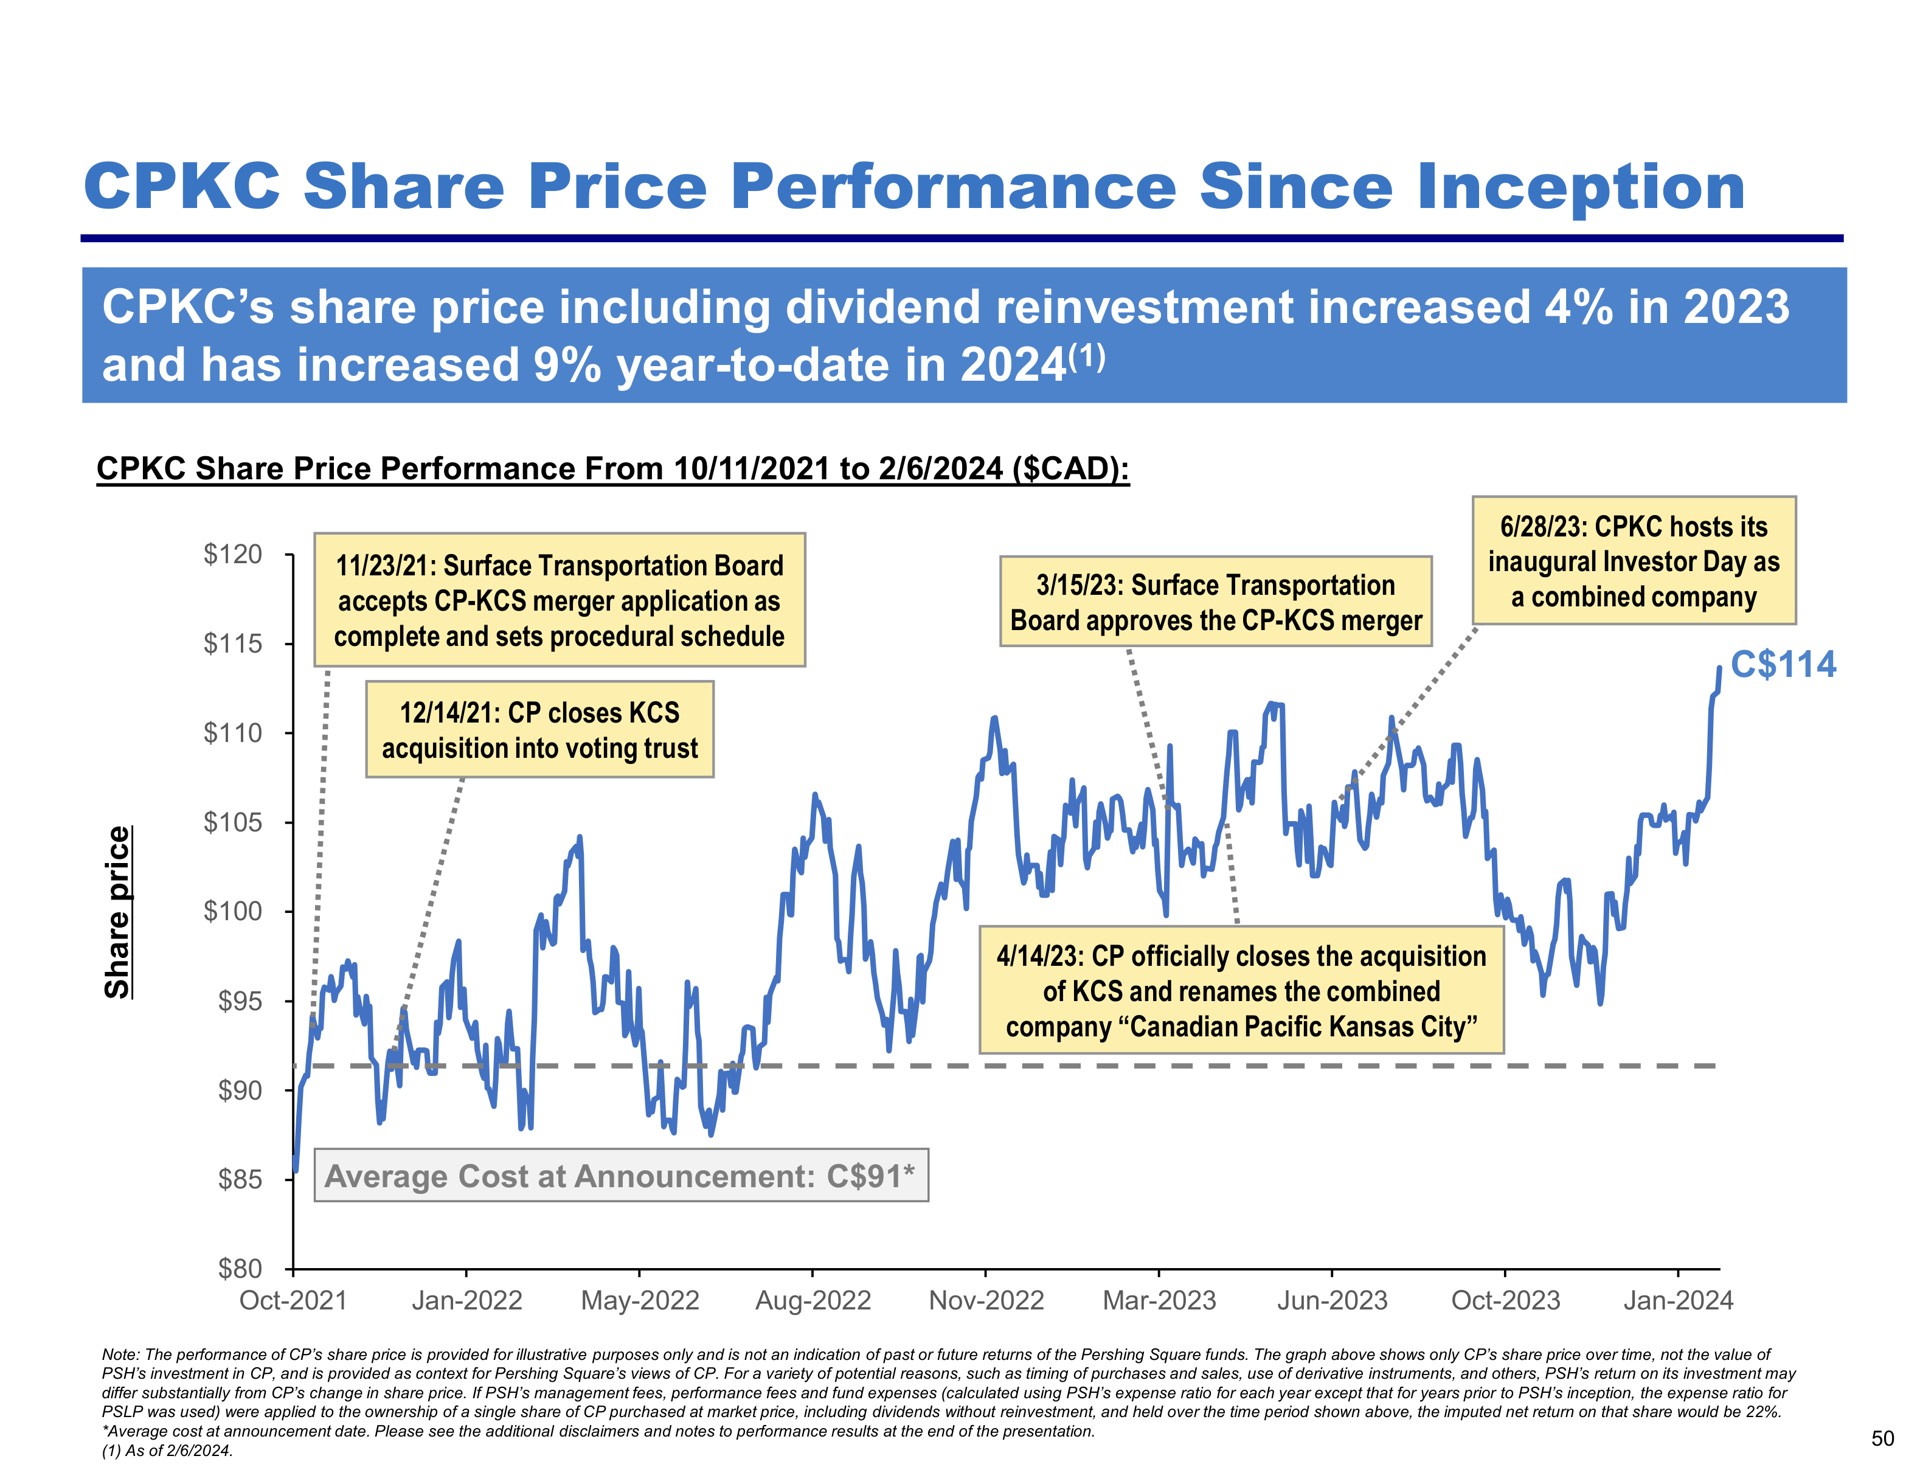 share price performance since inception share price including dividend reinvestment increased in and has increased year to date in | Pershing Square